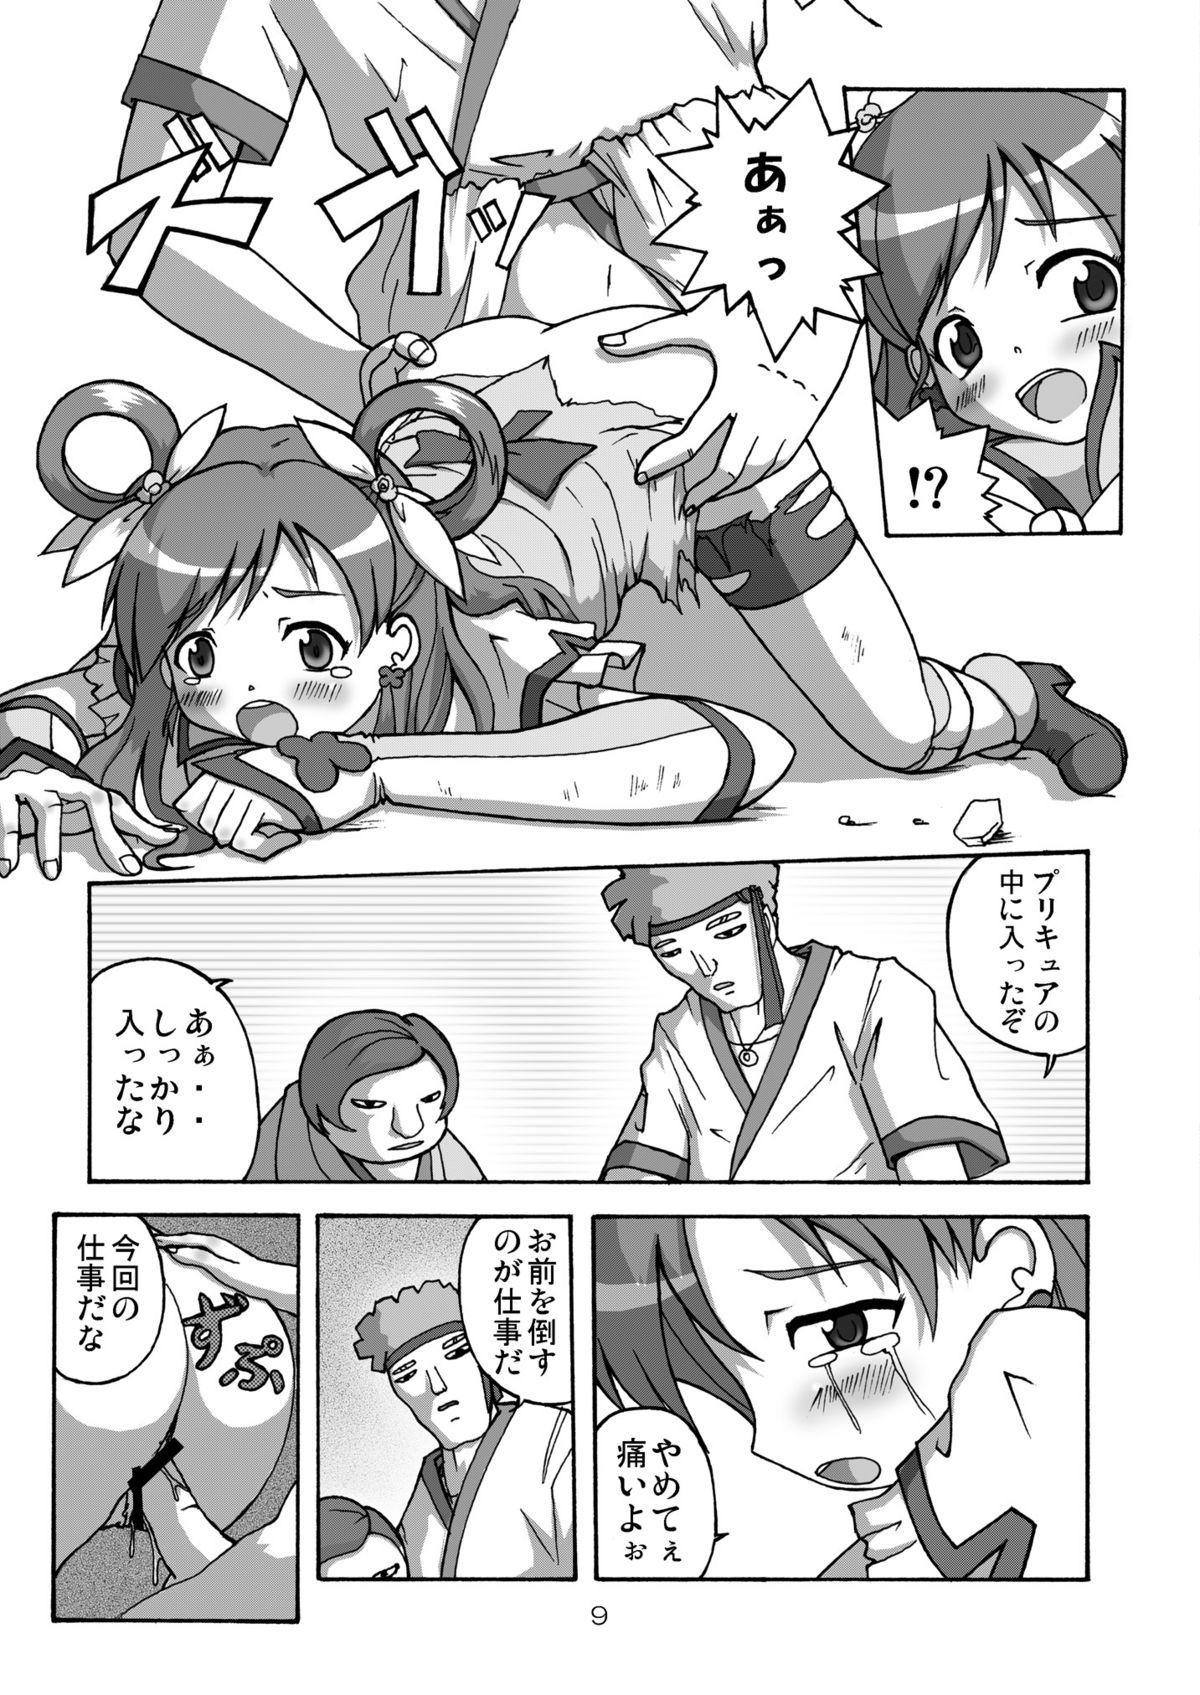 Cumming Bara no senshi-tachi | Fighter of Rose - Pretty cure Yes precure 5 Tanned - Page 9